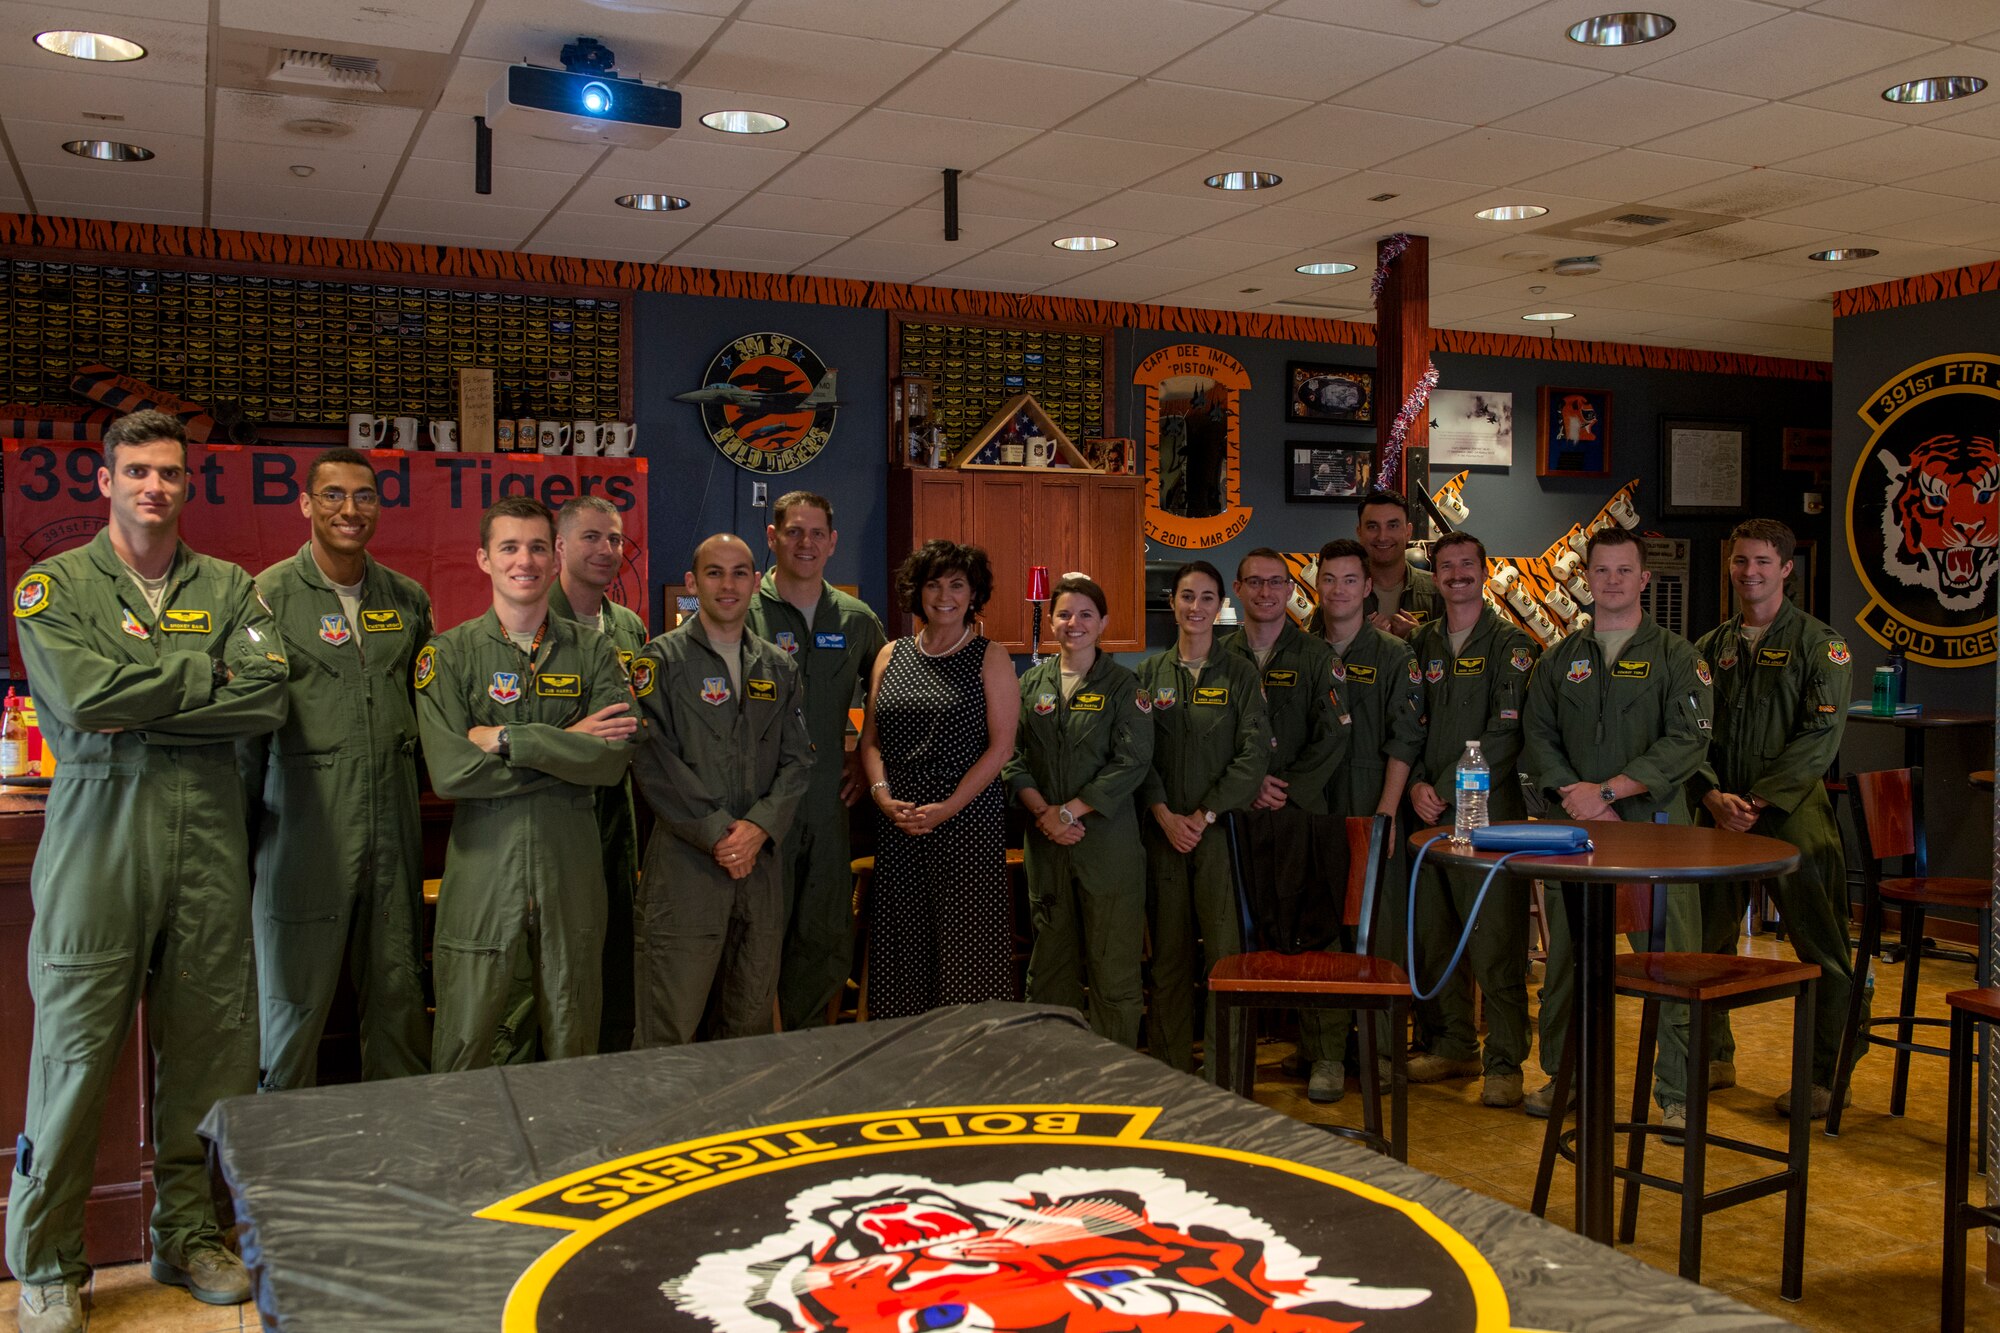 Janine Sijan-Rozina, Capt. Lance P. Sijan’s sister, meets with 391st Fighter Squadron Aircrew May 30, 2019 at Mountain Home Air Force Base, Idaho. Sijan-Rozina visited several locations on base during the two-day MHAFB premiere of the documentary “SIJAN” and spoke to next-generation Gunfighters about her brother’s story. (U.S Air Force photo by Airman 1st Class JaNae Capuno)